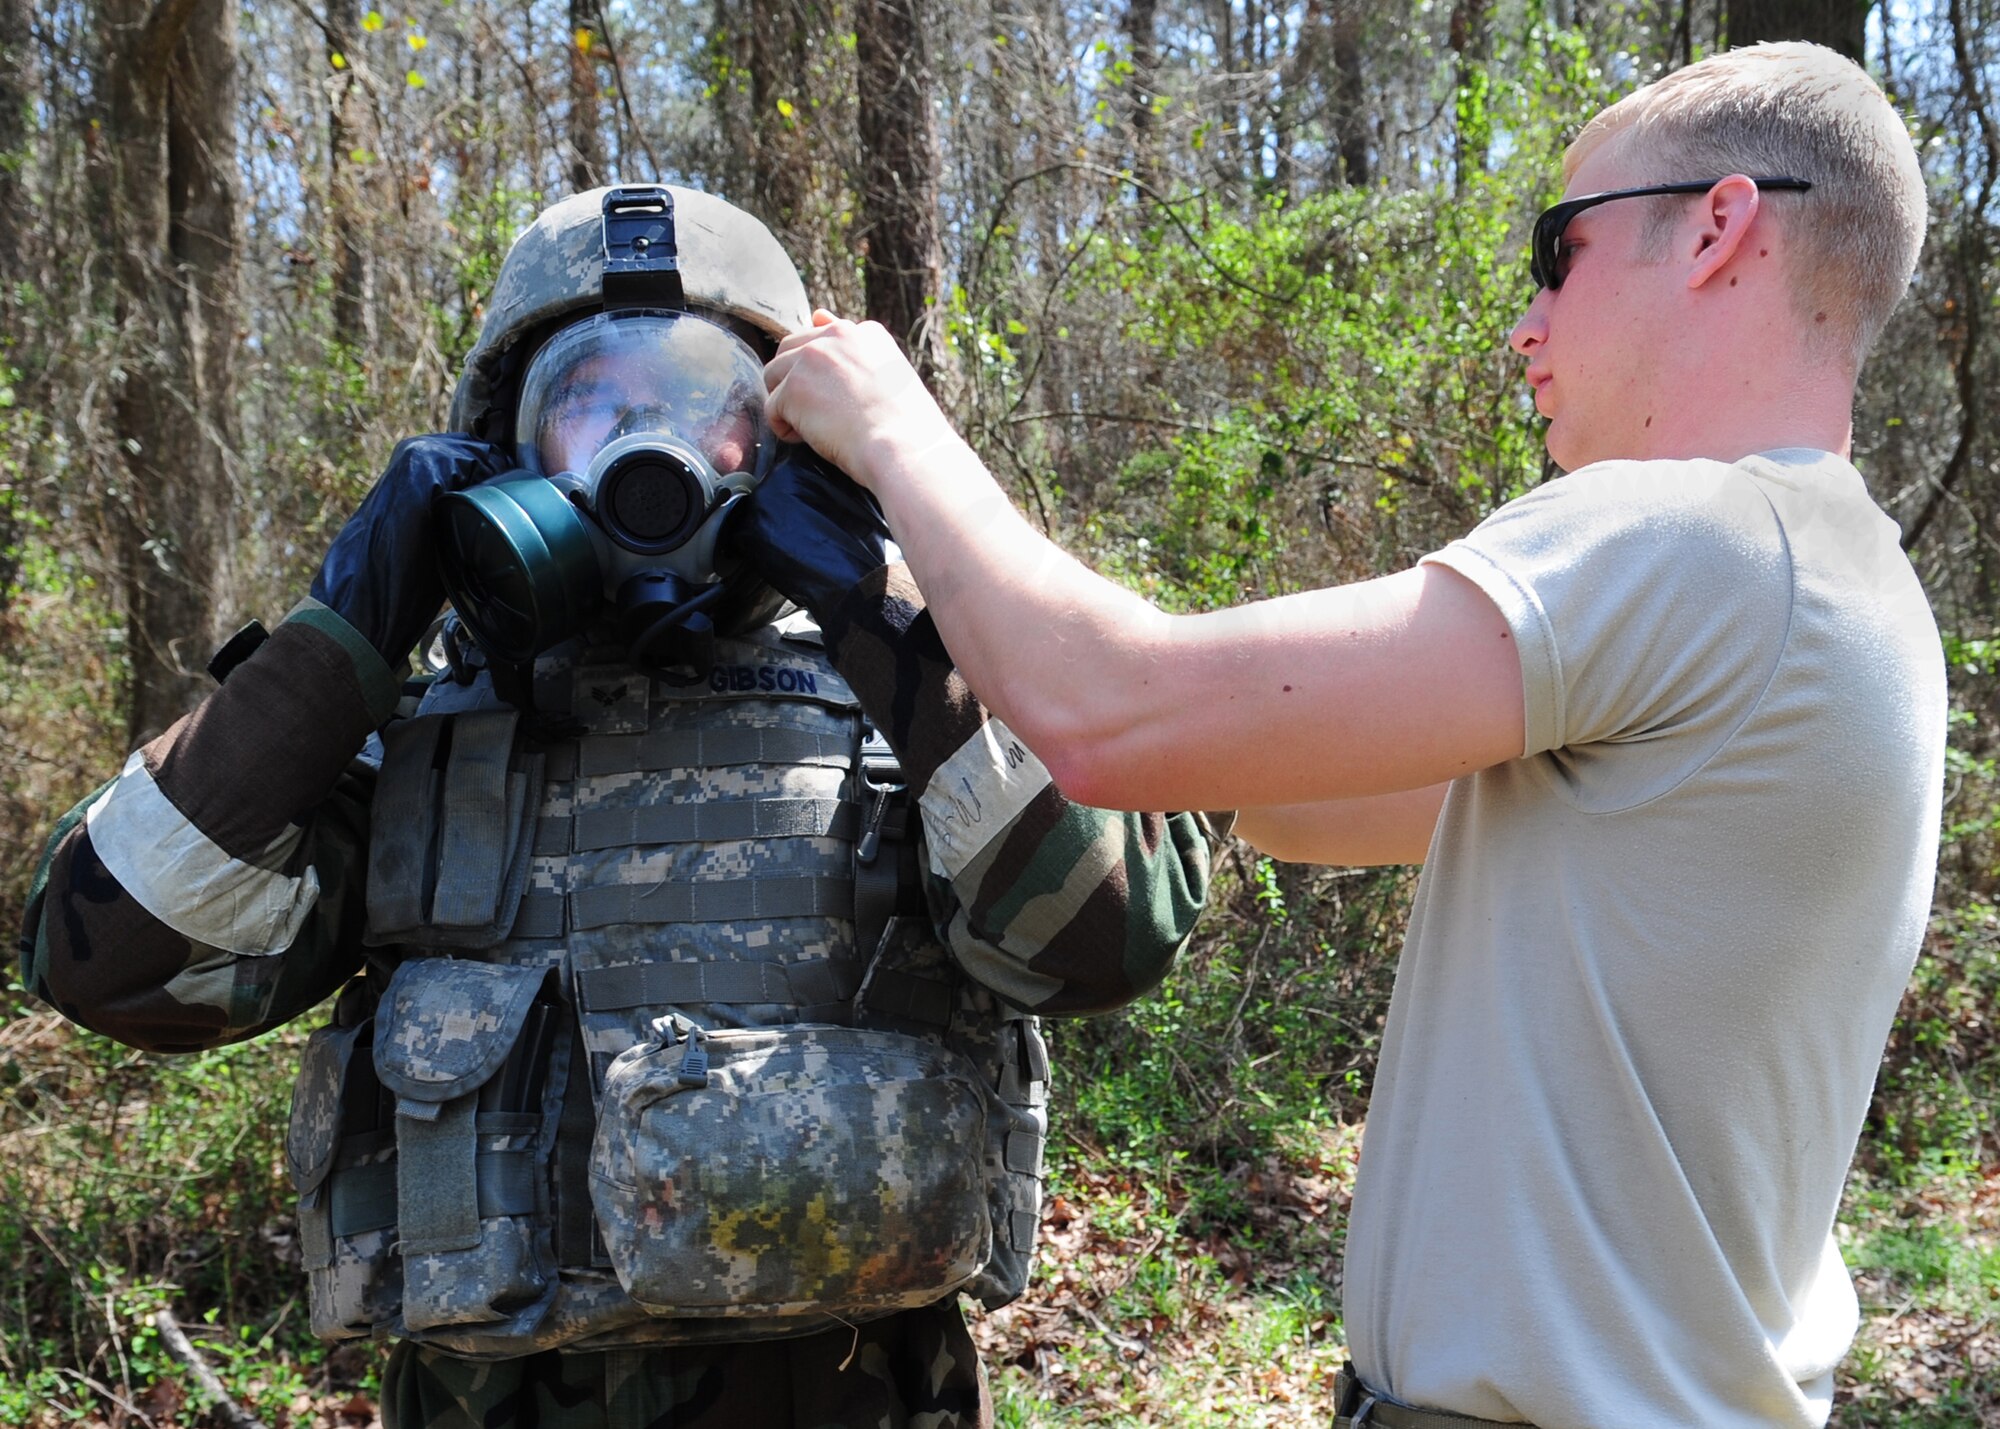 Senior Airman Ross Turner (right) helps Senior Airman Cooper Gibson suit up in chemical warfare gear during an explosive ordinance disposal training exercise at Seymour Johnson Air Force Base, N.C., March 19, 2009. The exercise evaluates the Airmen's ability to locate, identify and dispose a chemical weapon. Both Airmen are explosive ordnance disposal specialists from the 4th Civil Engineer Squadron. (U.S. Air Force Photo by Airman 1st Class Rae Perry)